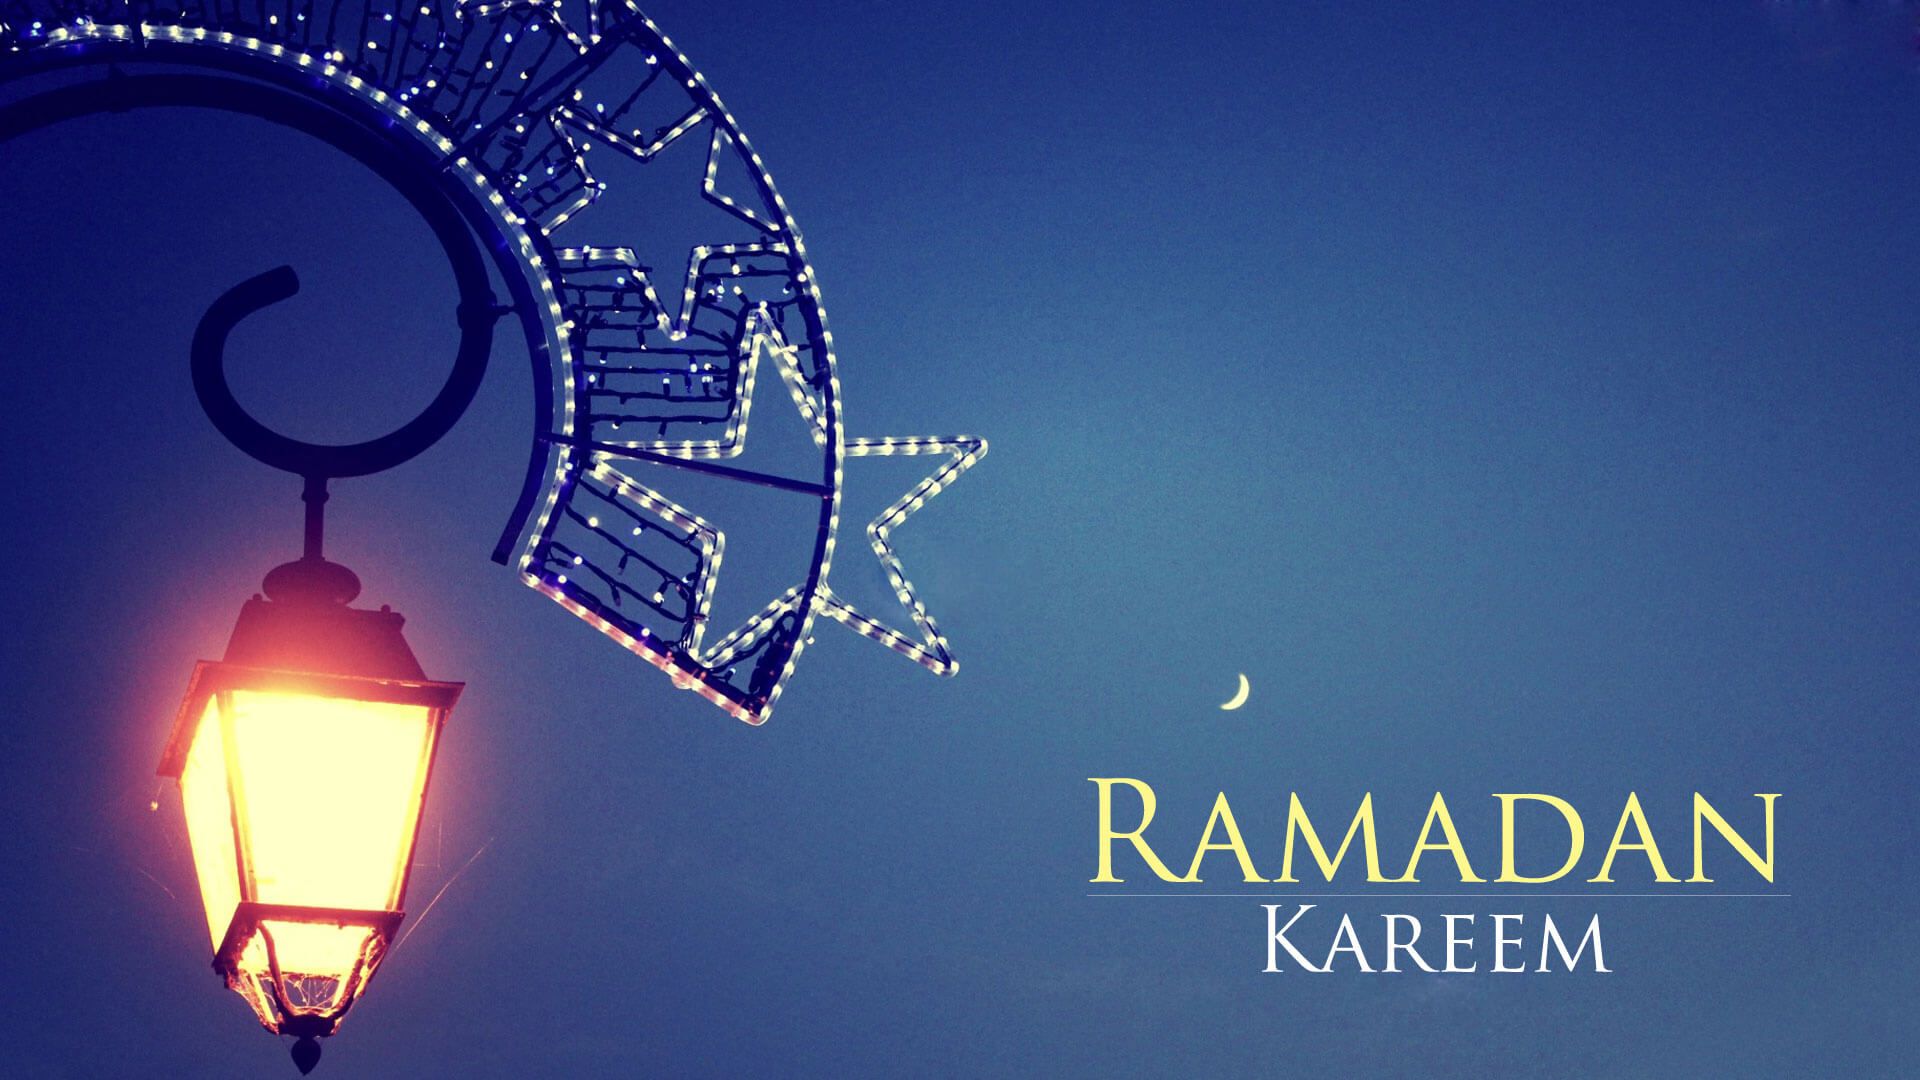 COVID-19 Parenting Tips for Ramadan